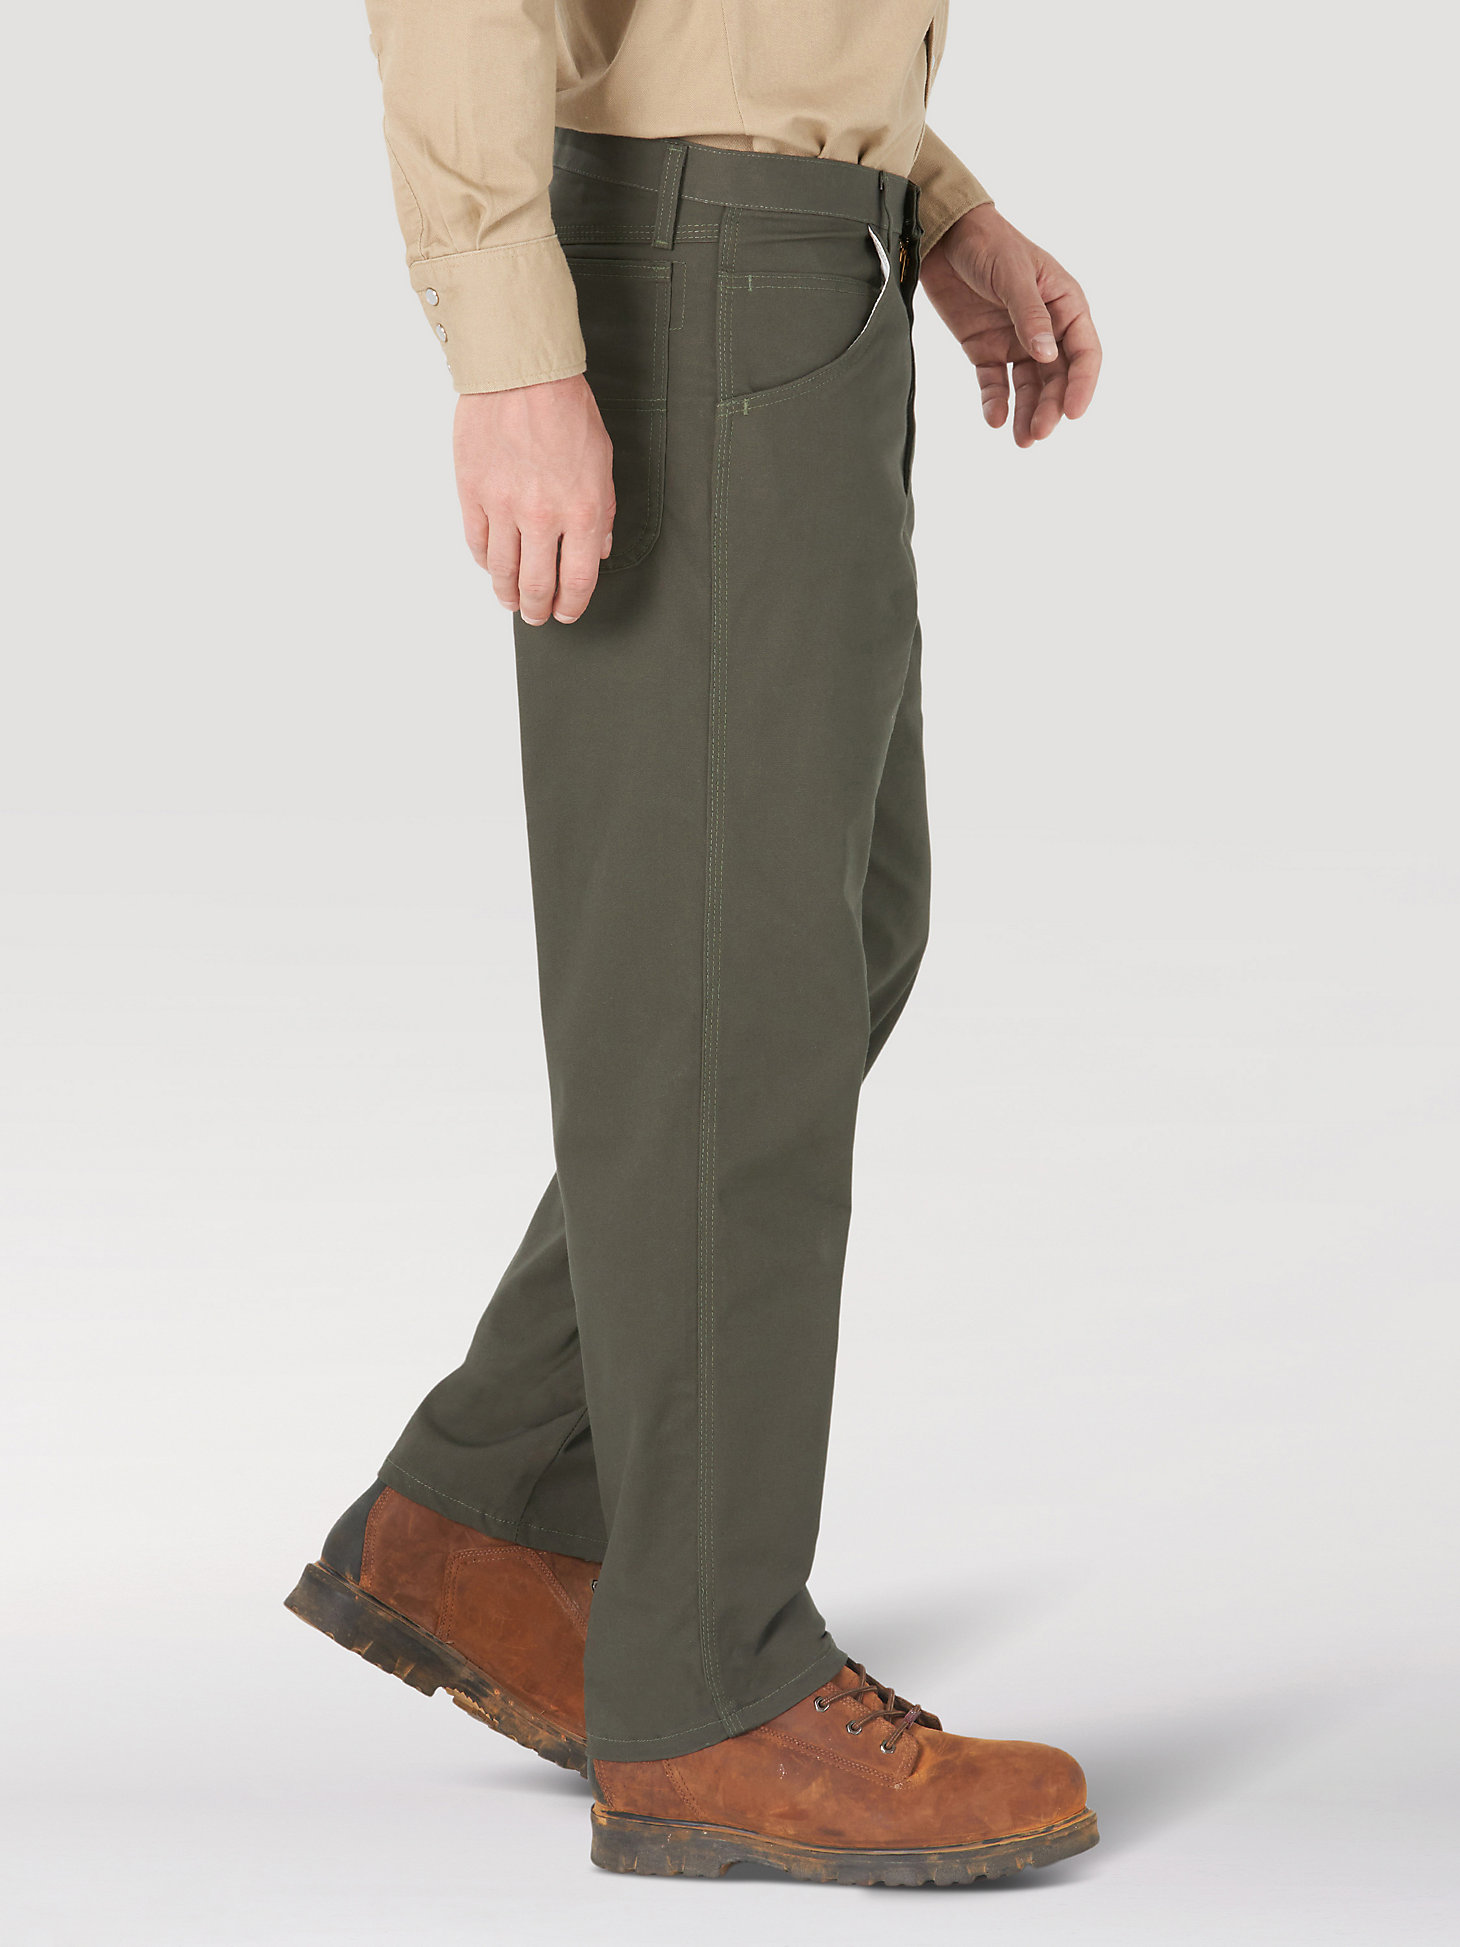 Wrangler® RIGGS Workwear® FR Flame Resistant Carpenter Pant in Loden alternative view 1